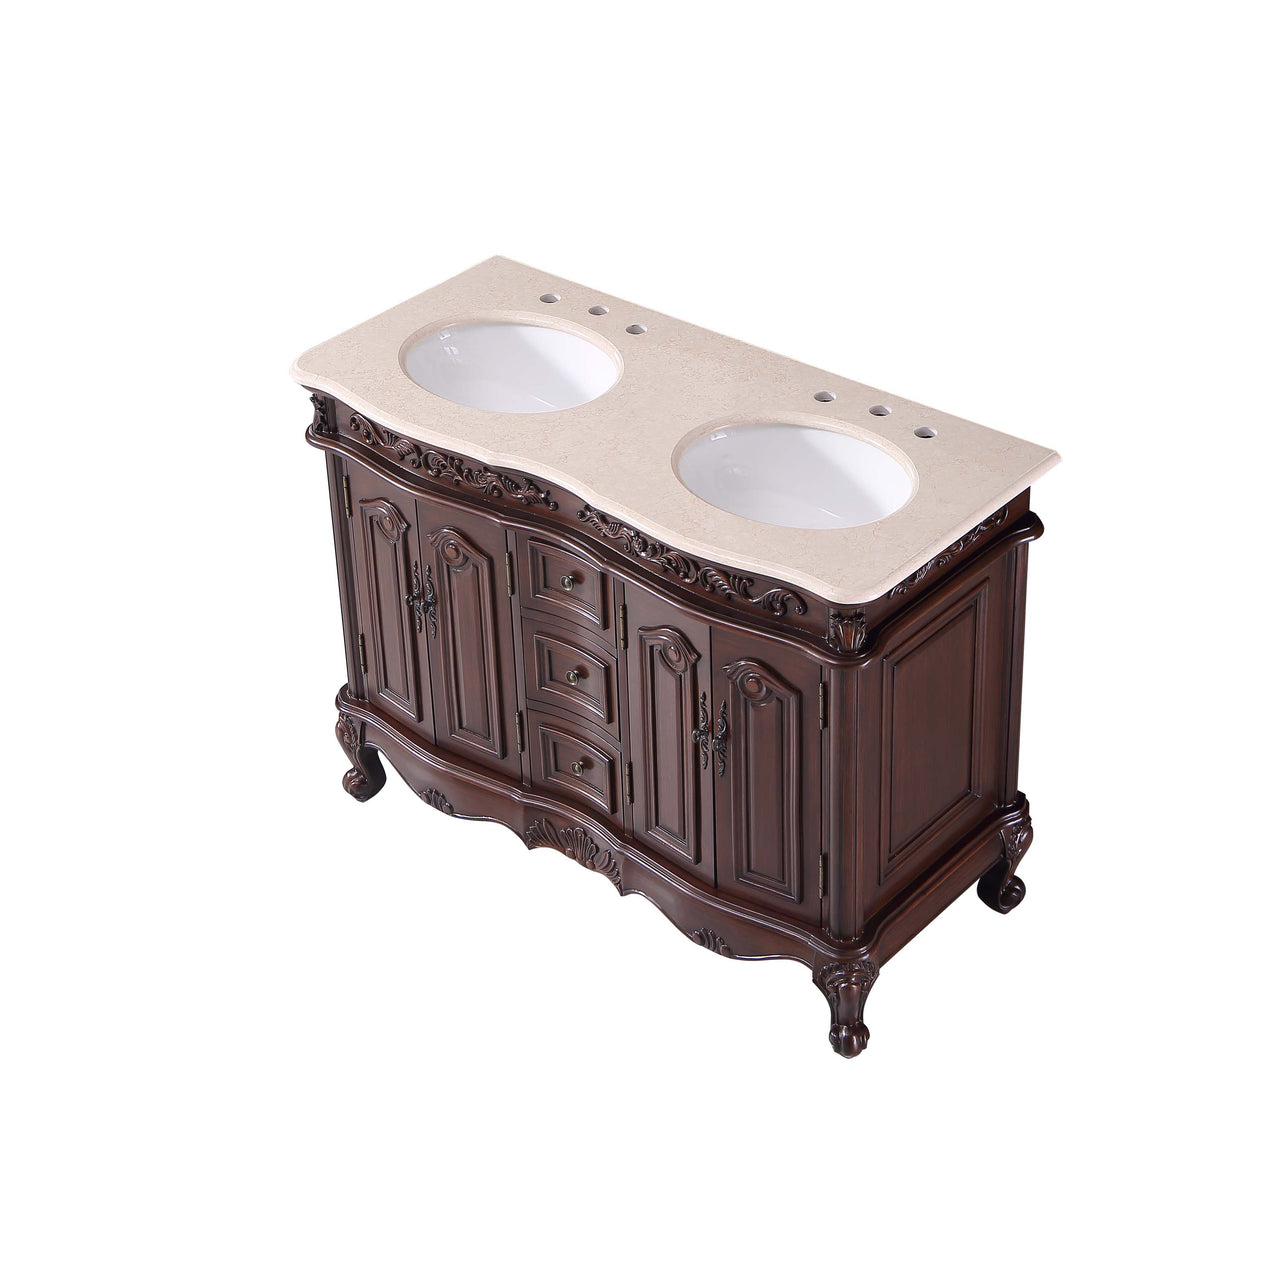 Silkroad 48" Double Sink Cabinet - Crema Marfil Top, Undermount White Ceramic Sinks (3-hole)